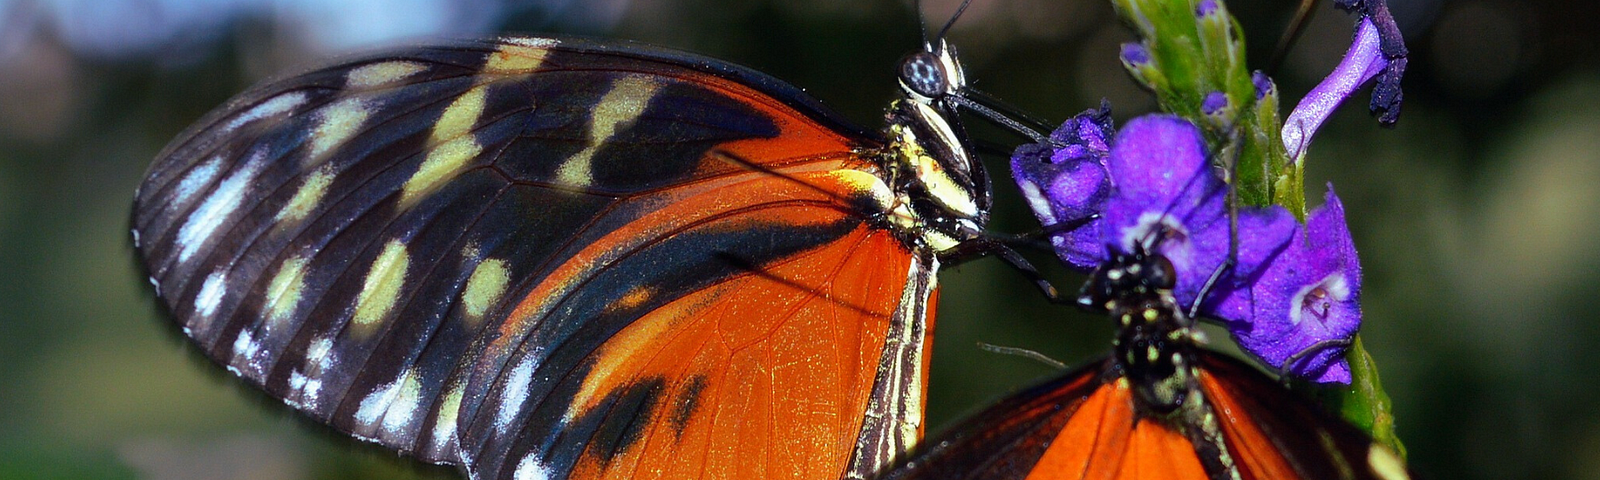 Two orange, black, and cream butterflies drink from a purple flower.